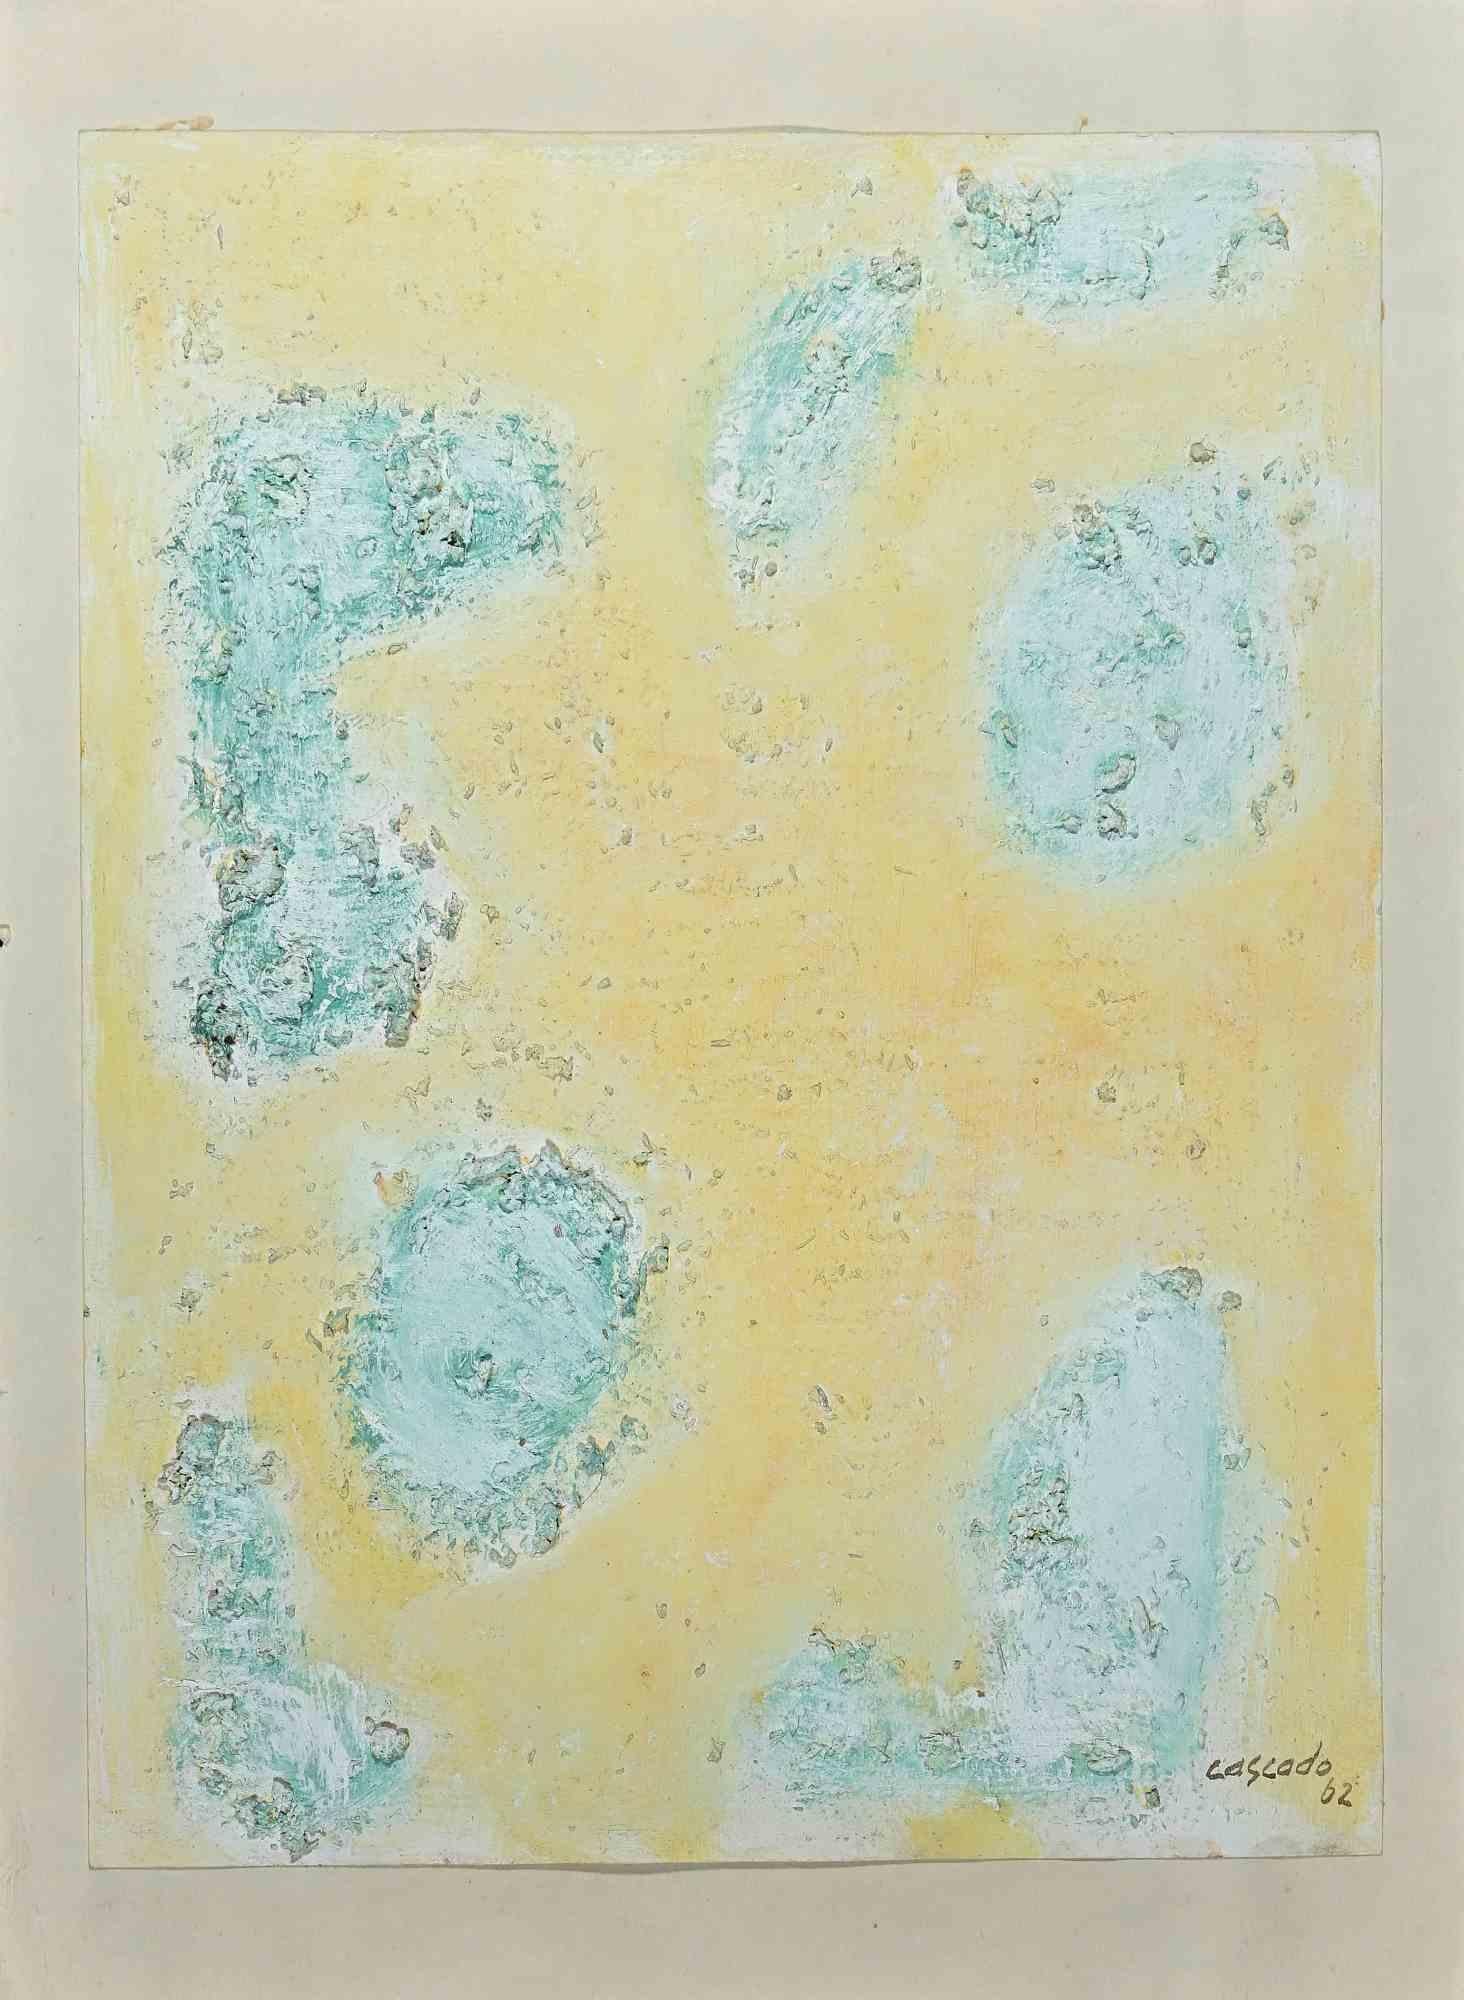 Green Abstract Composition is an original artwork, in mixed media on paper realized in 1962 by Ramón Sánchez Cascado, Spanish artist born in 1930.

Hand-signed and Dated on the lower right.

The artwork represents a poetic composition in